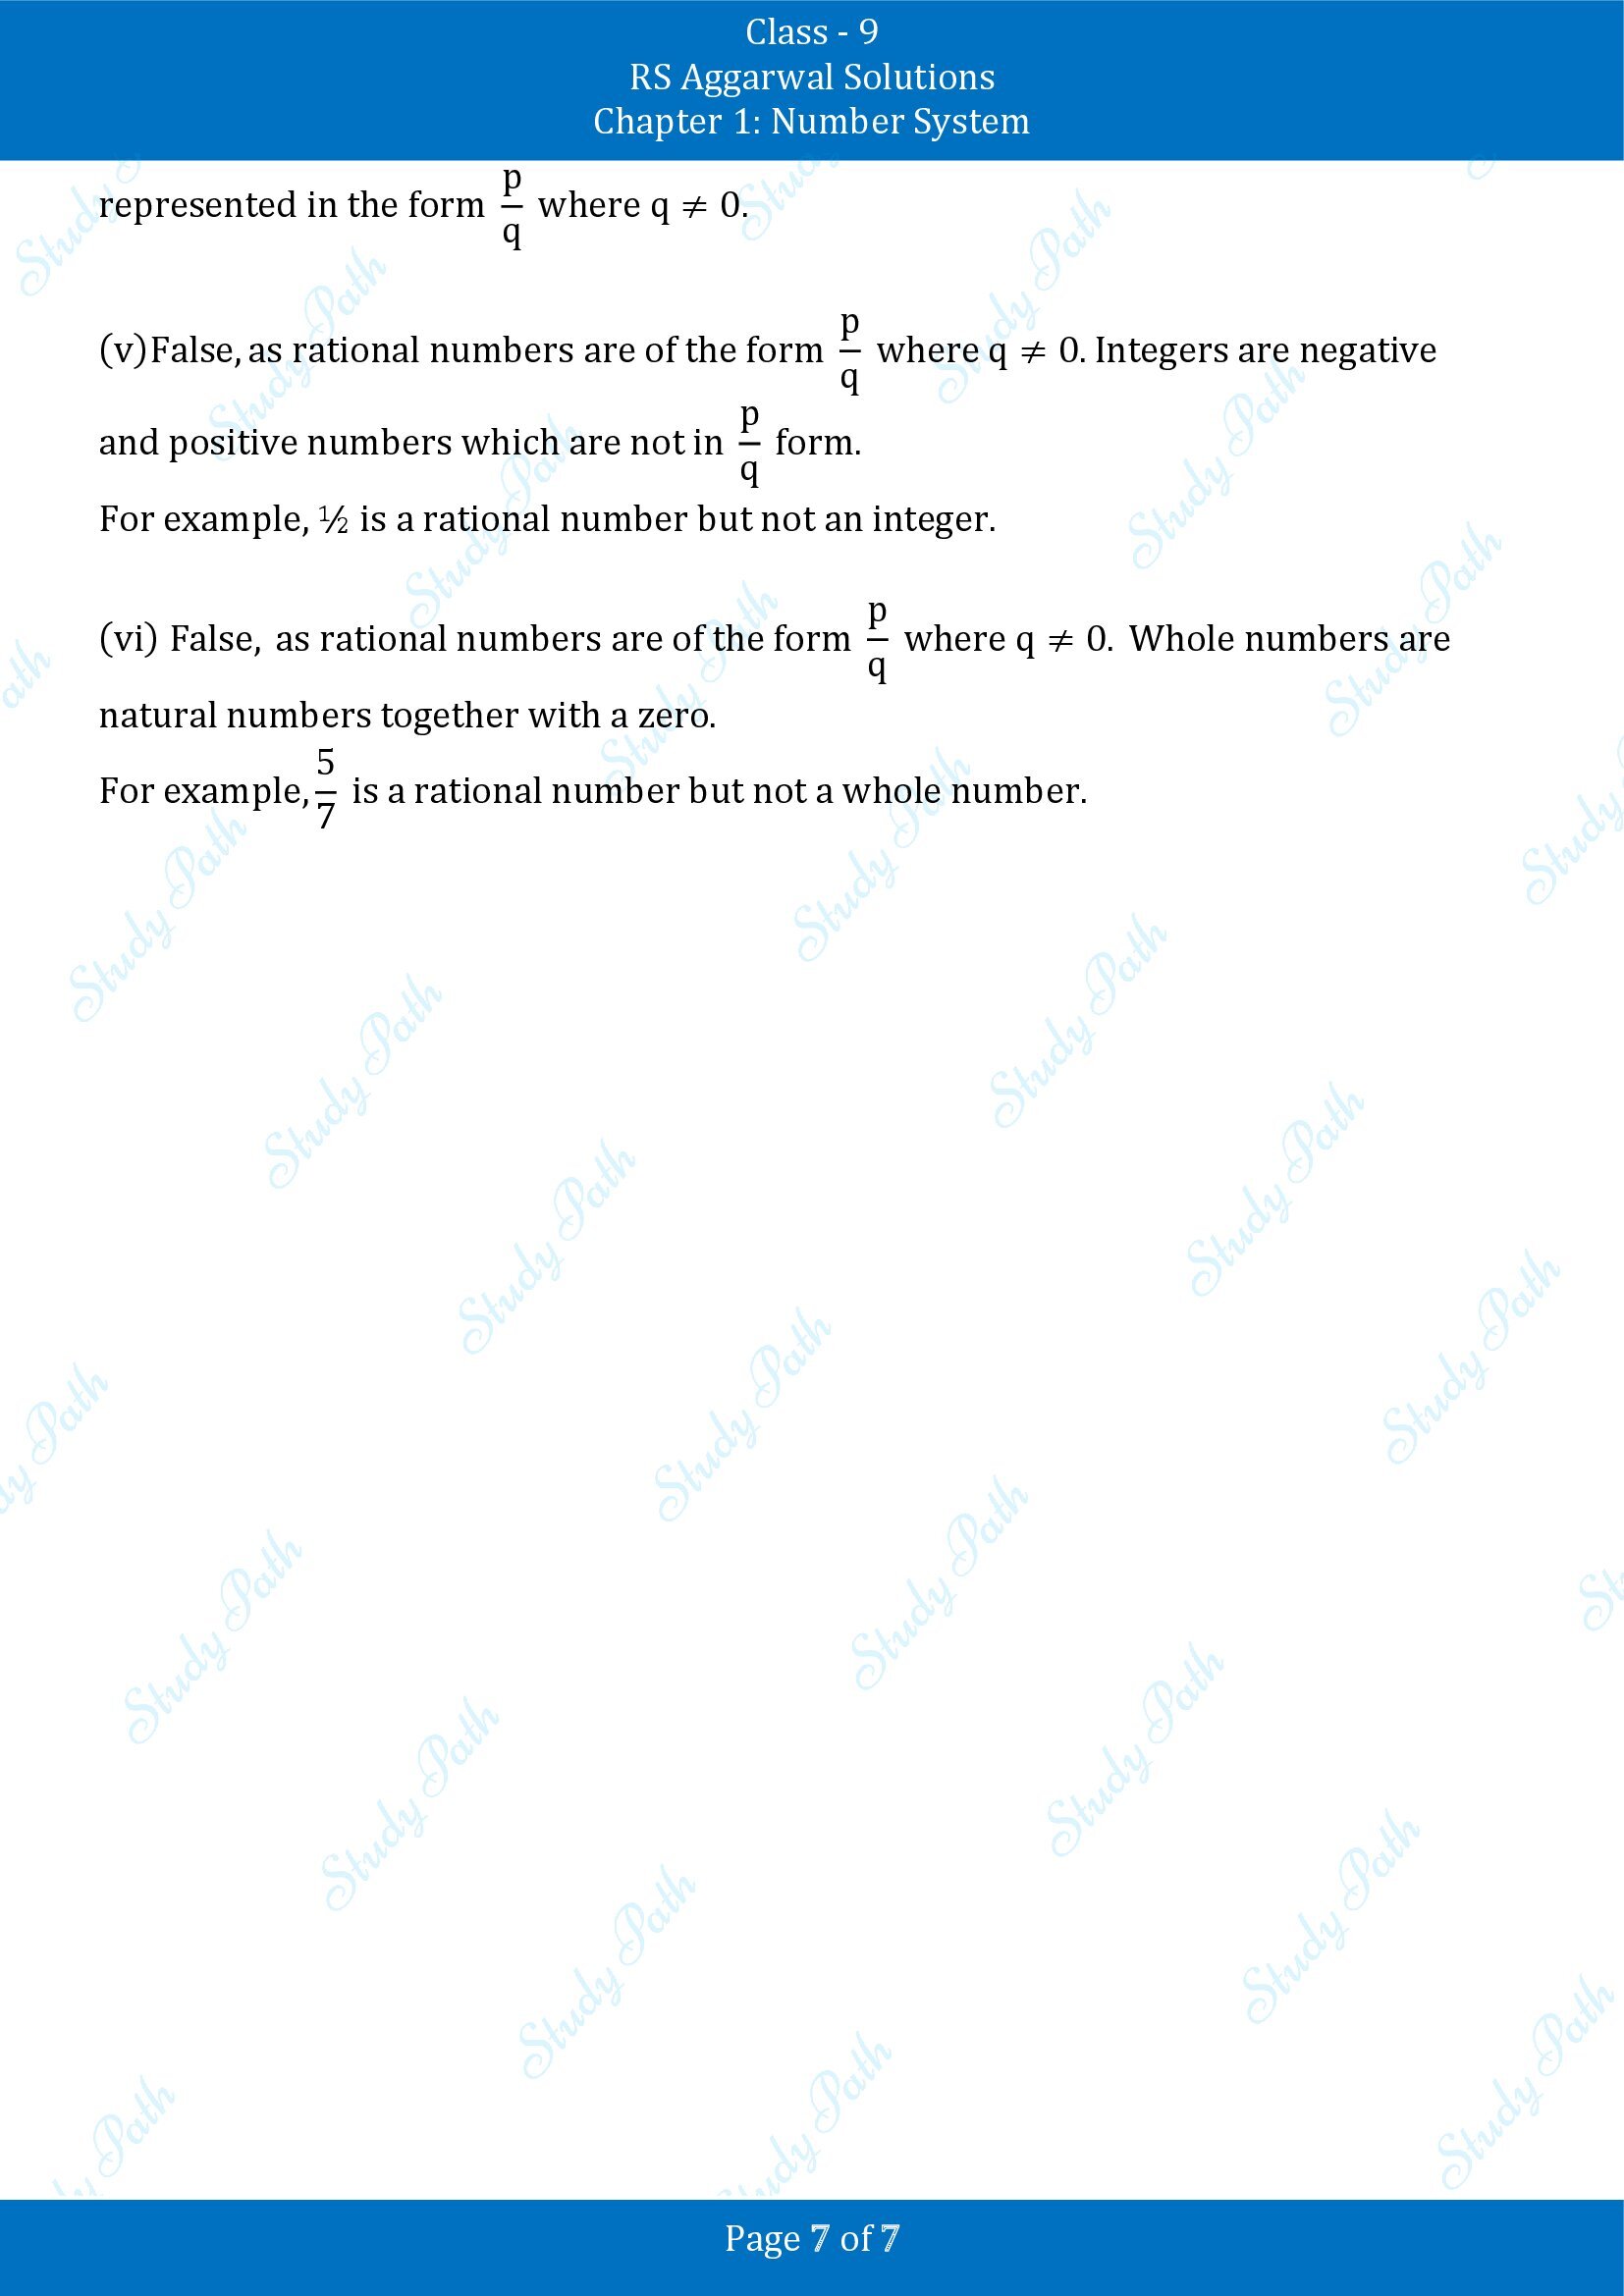 RS Aggarwal Solutions Class 9 Chapter 1 Number System Exercise 1A 00007